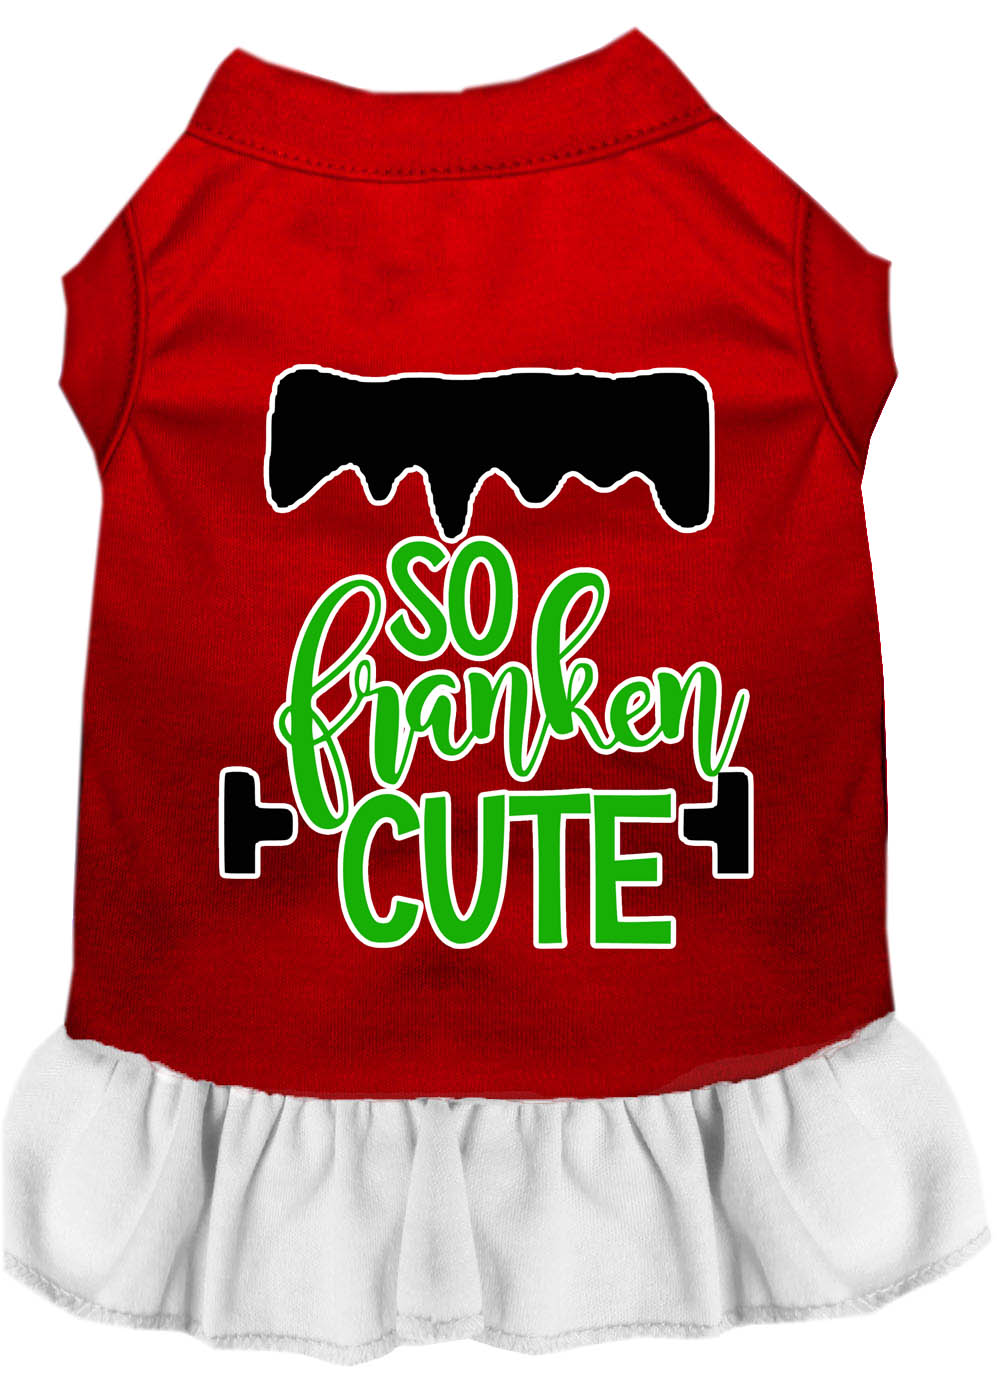 So Franken Cute Screen Print Dog Dress Red with White XL